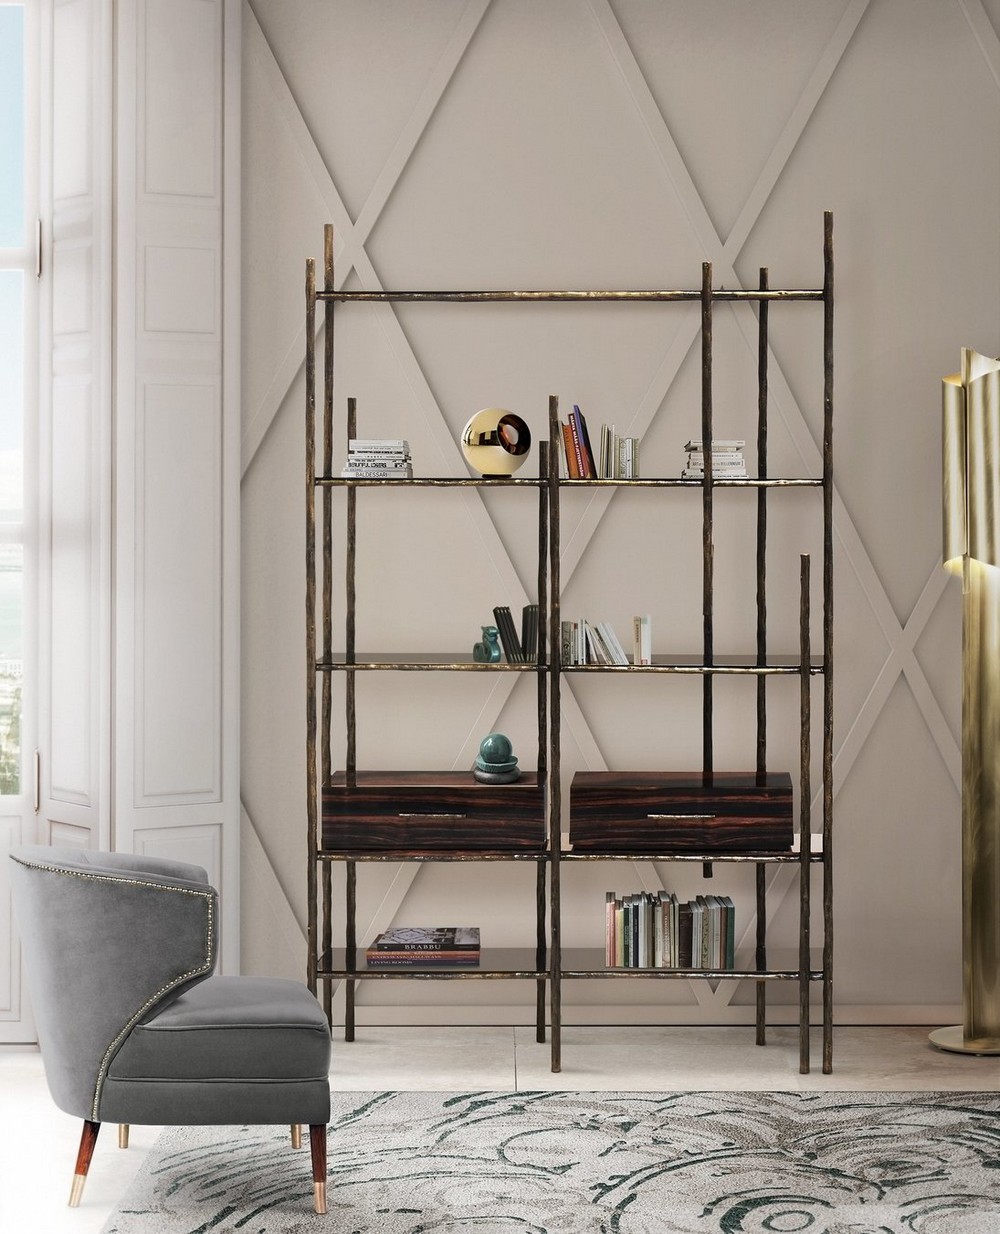 5 Luxury Bookcases That Will Upscale Your Home Design